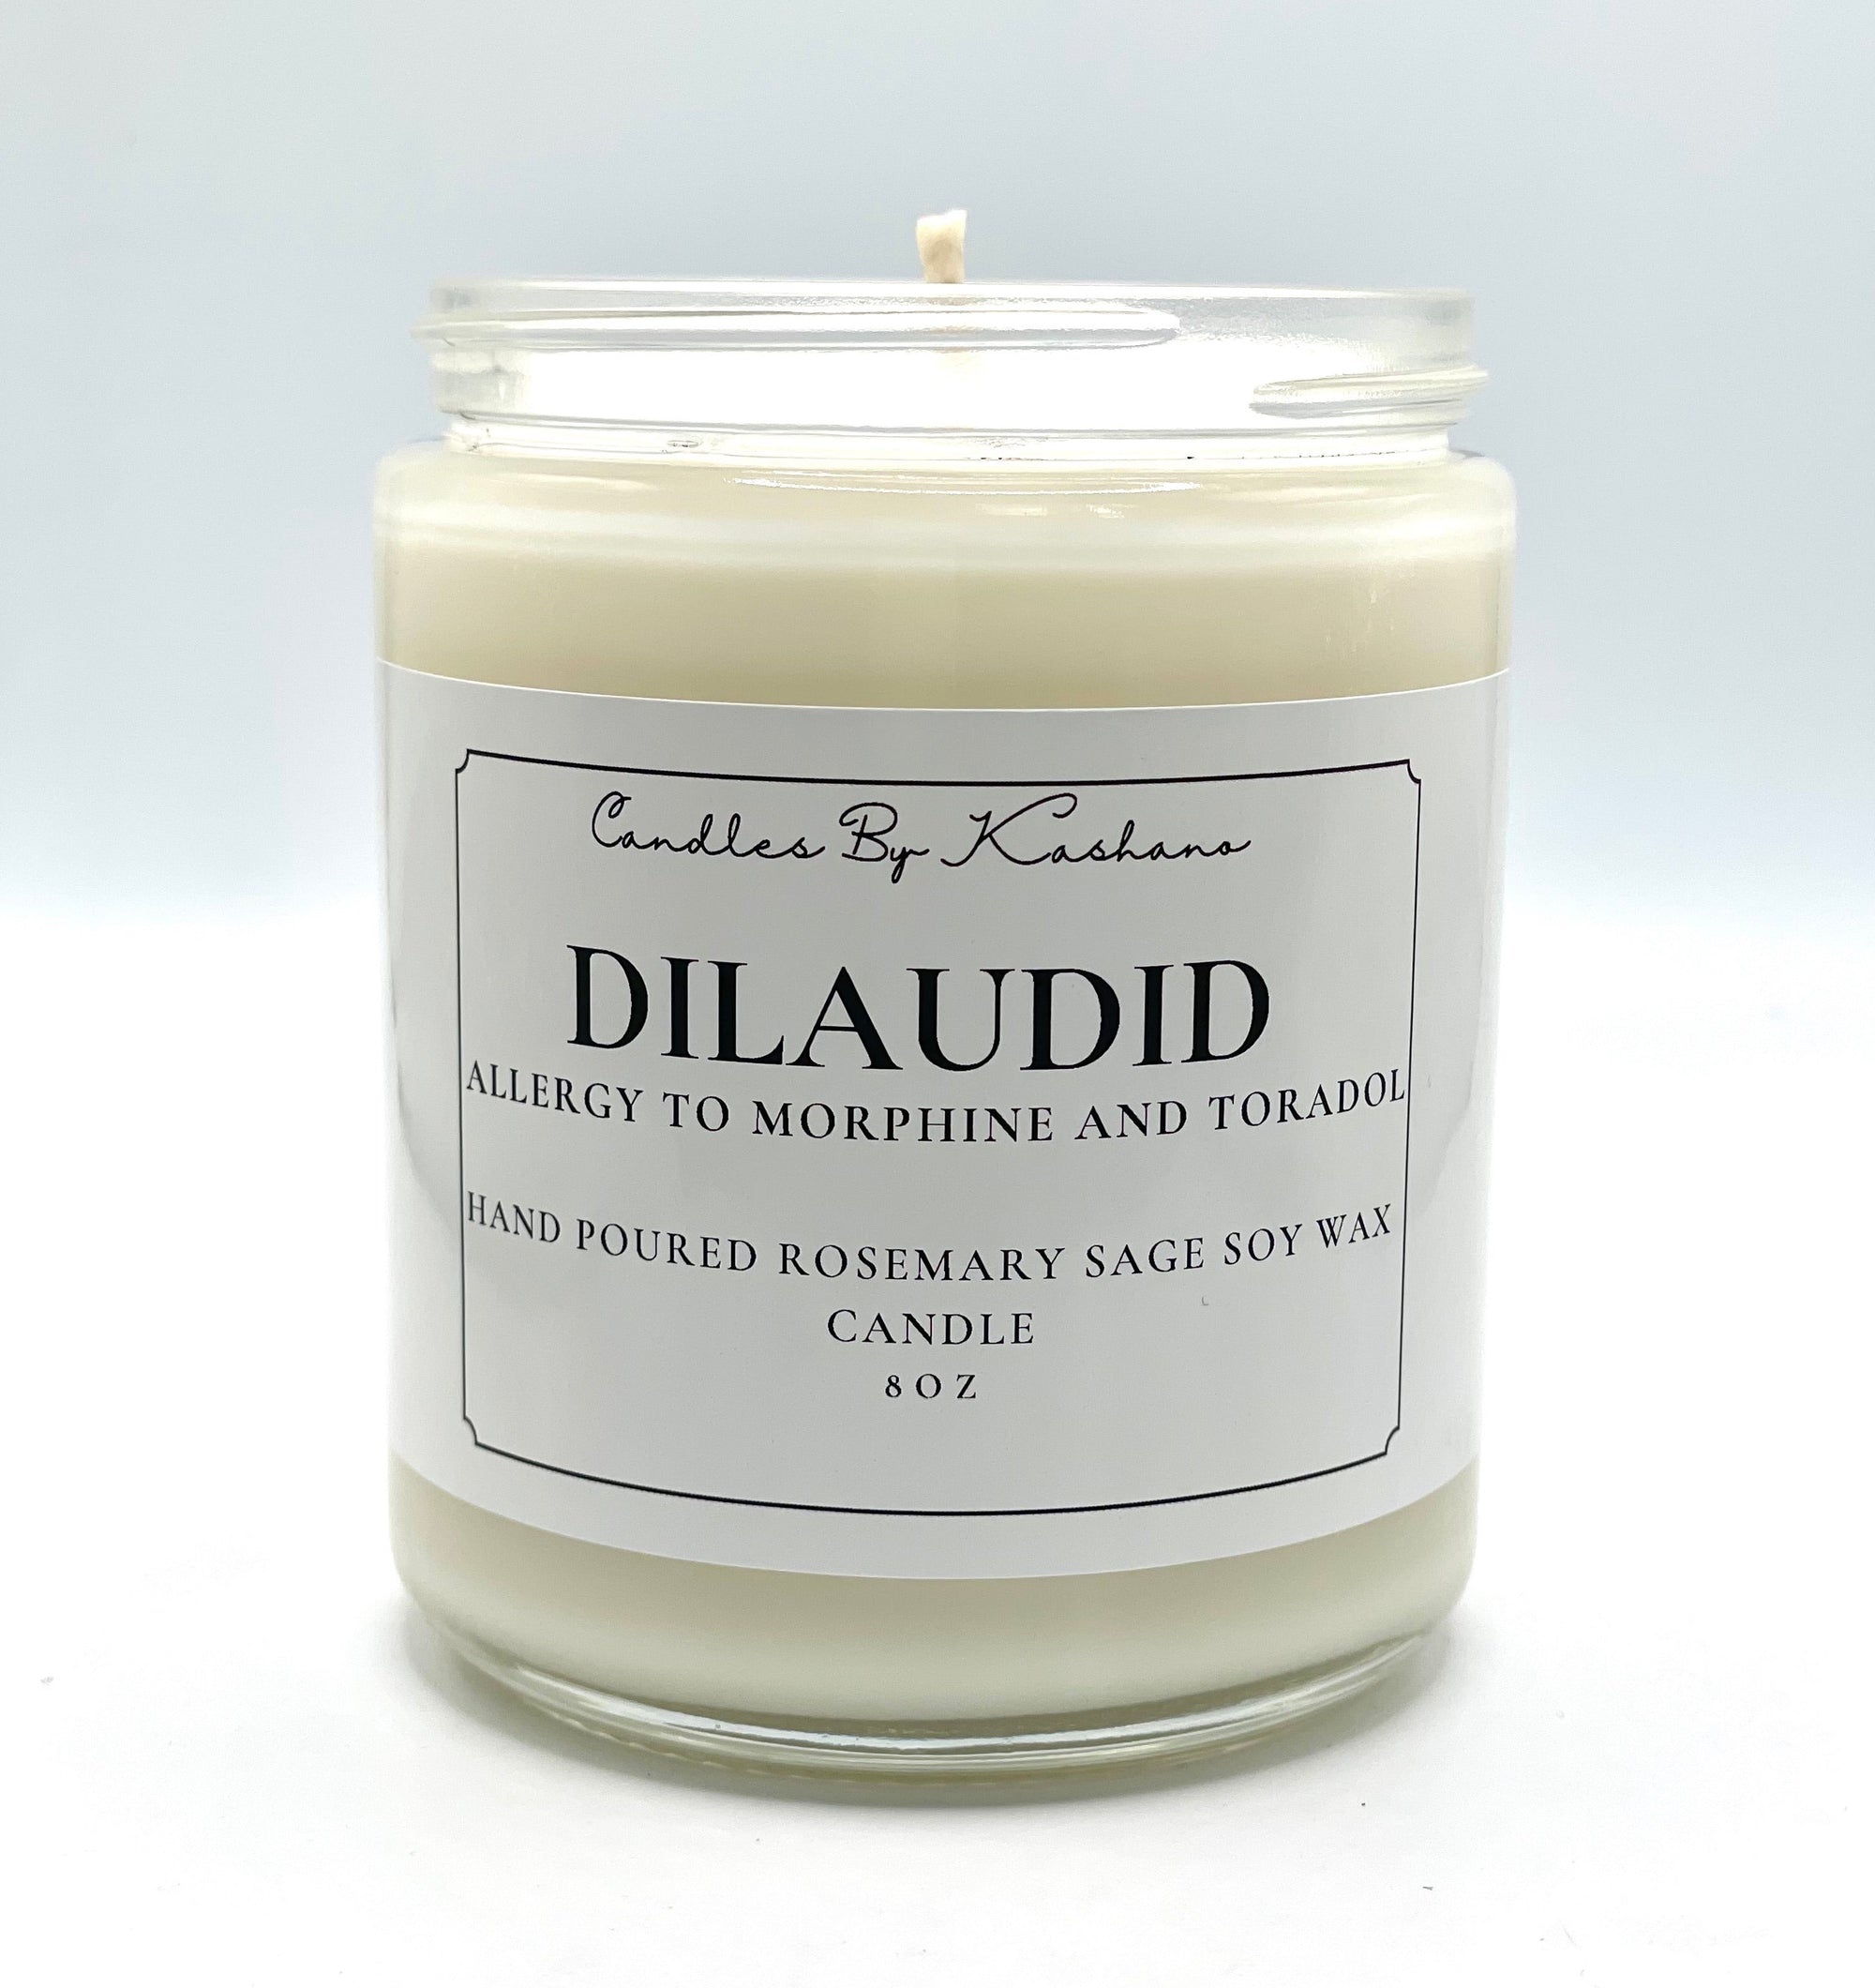 Dilaudid Candle - Rosemary Sage